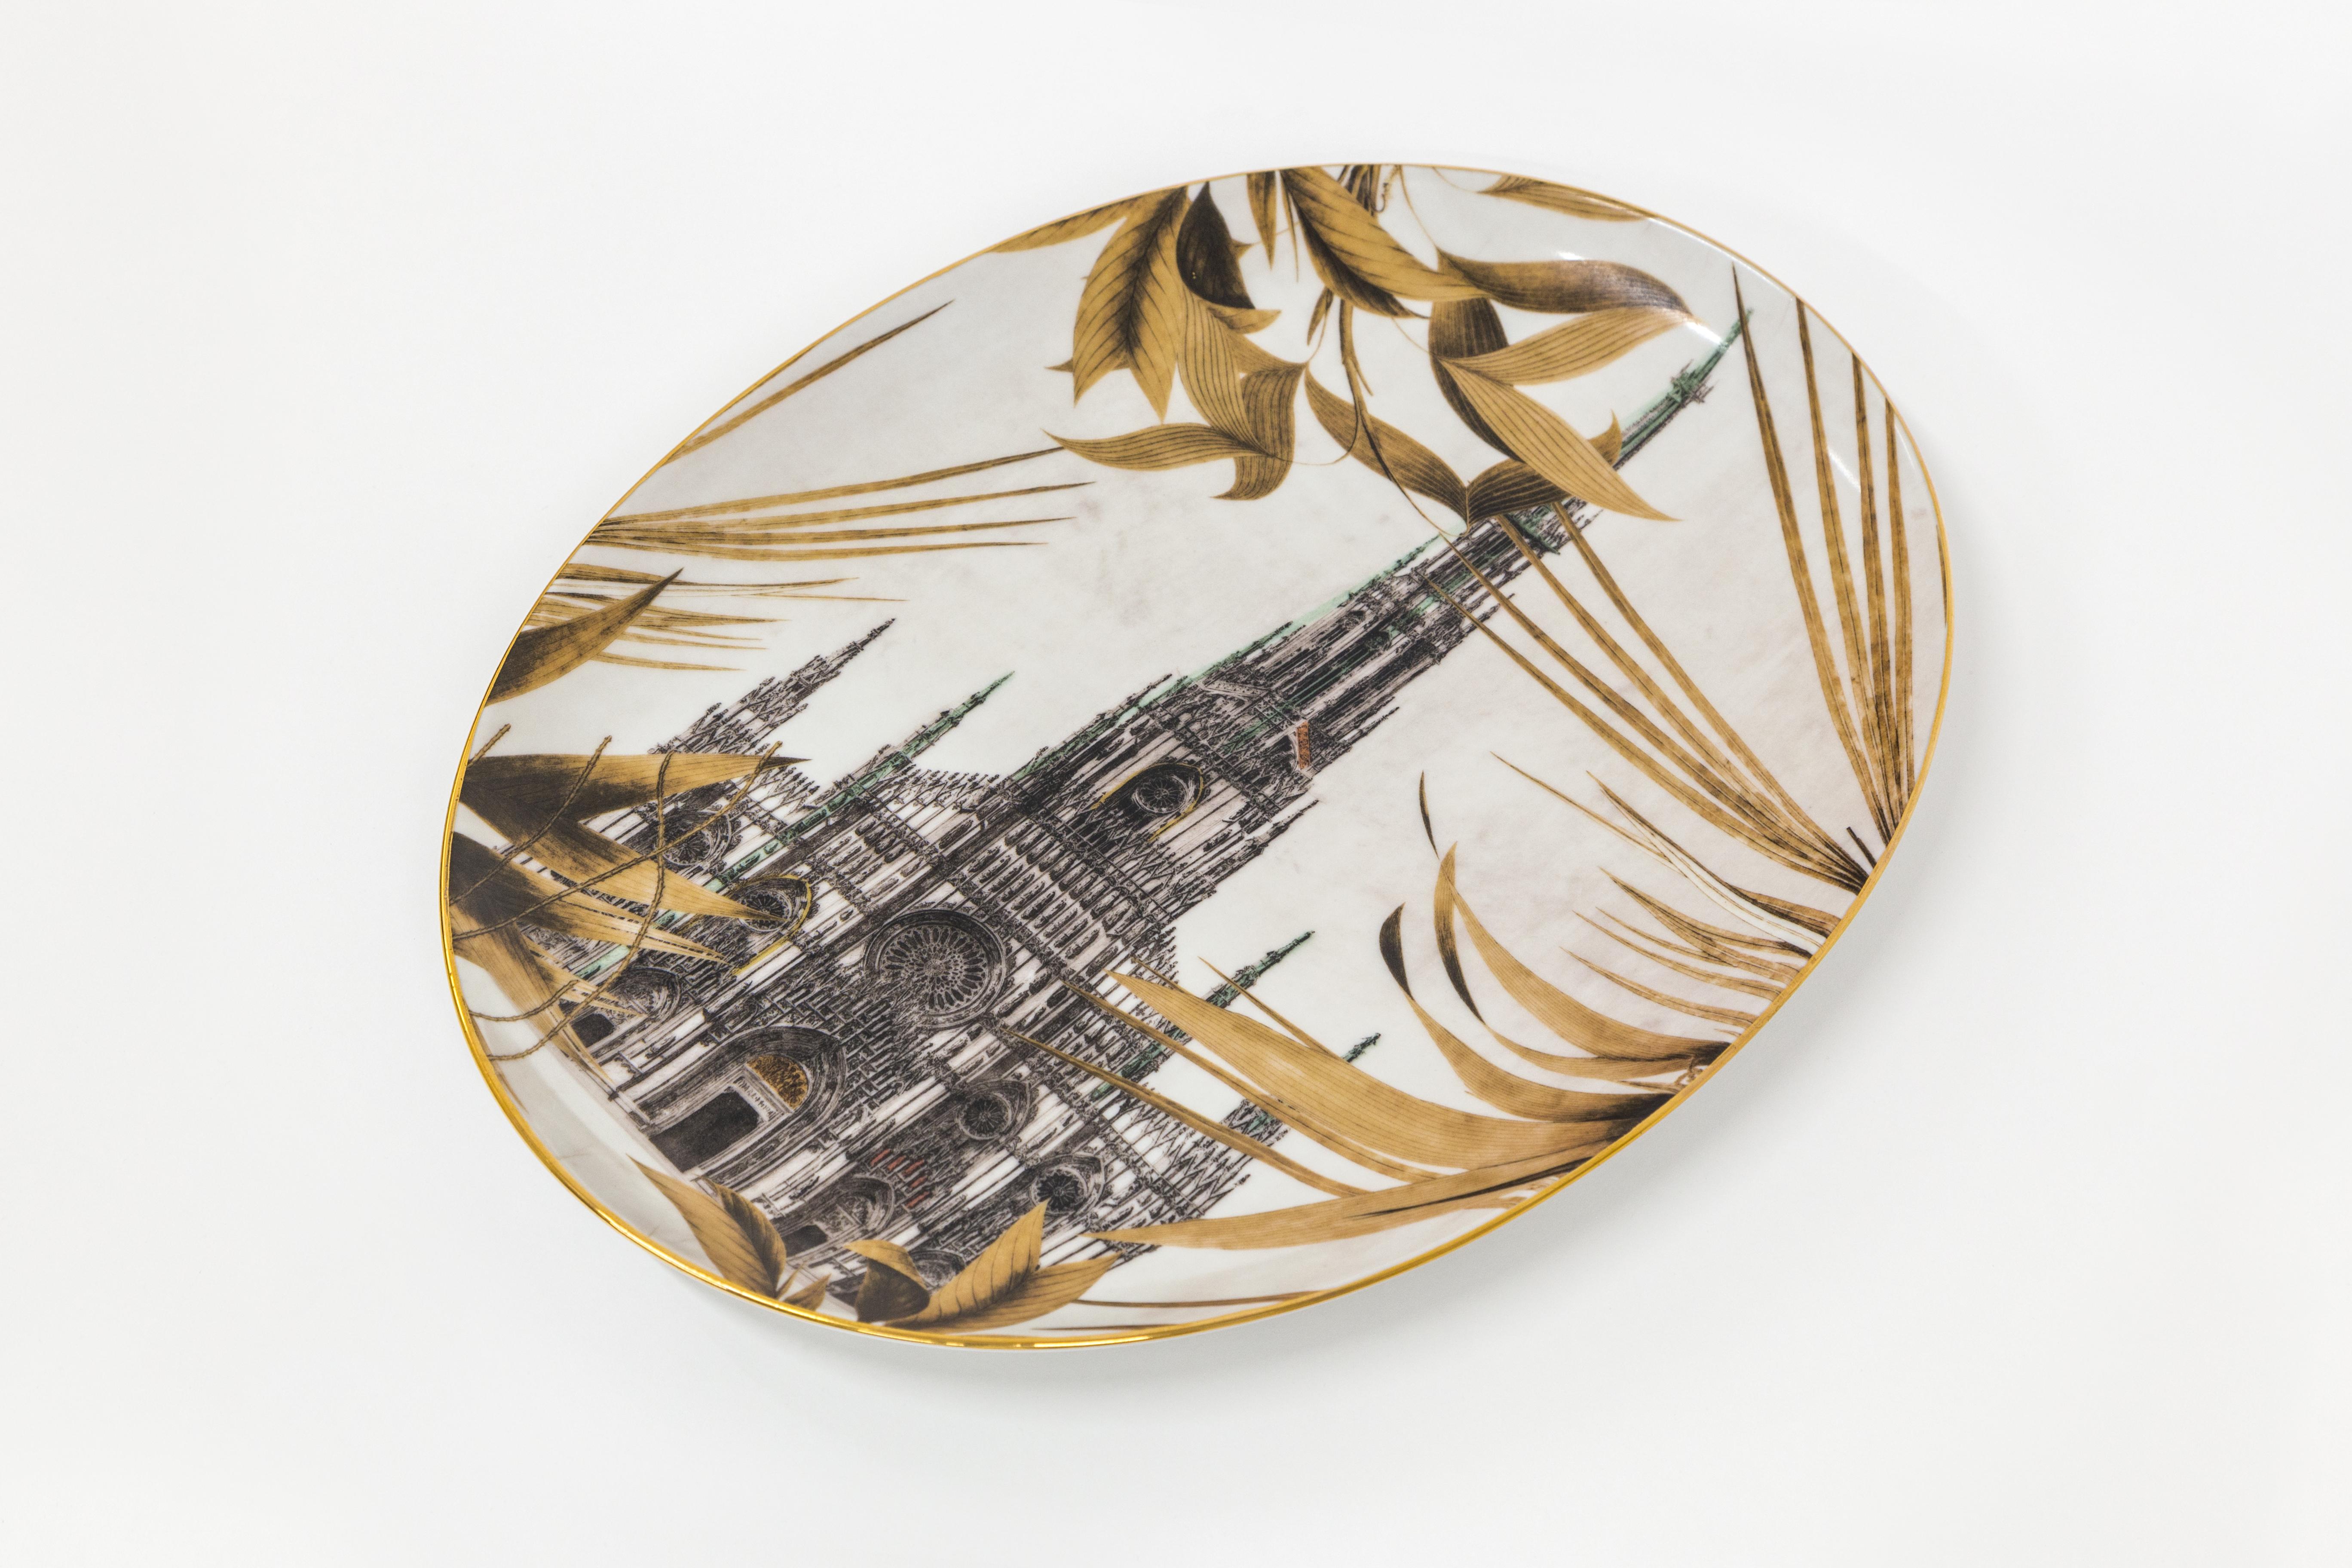 This 28x38cm oval tray is part of Il Duomo che Non c'è collection by Grand Tour by Vito Nesta. The classic and versatile shape is a must-have inside any home to embellish a table or beautify a wall. This tray portrays one of the facades that were